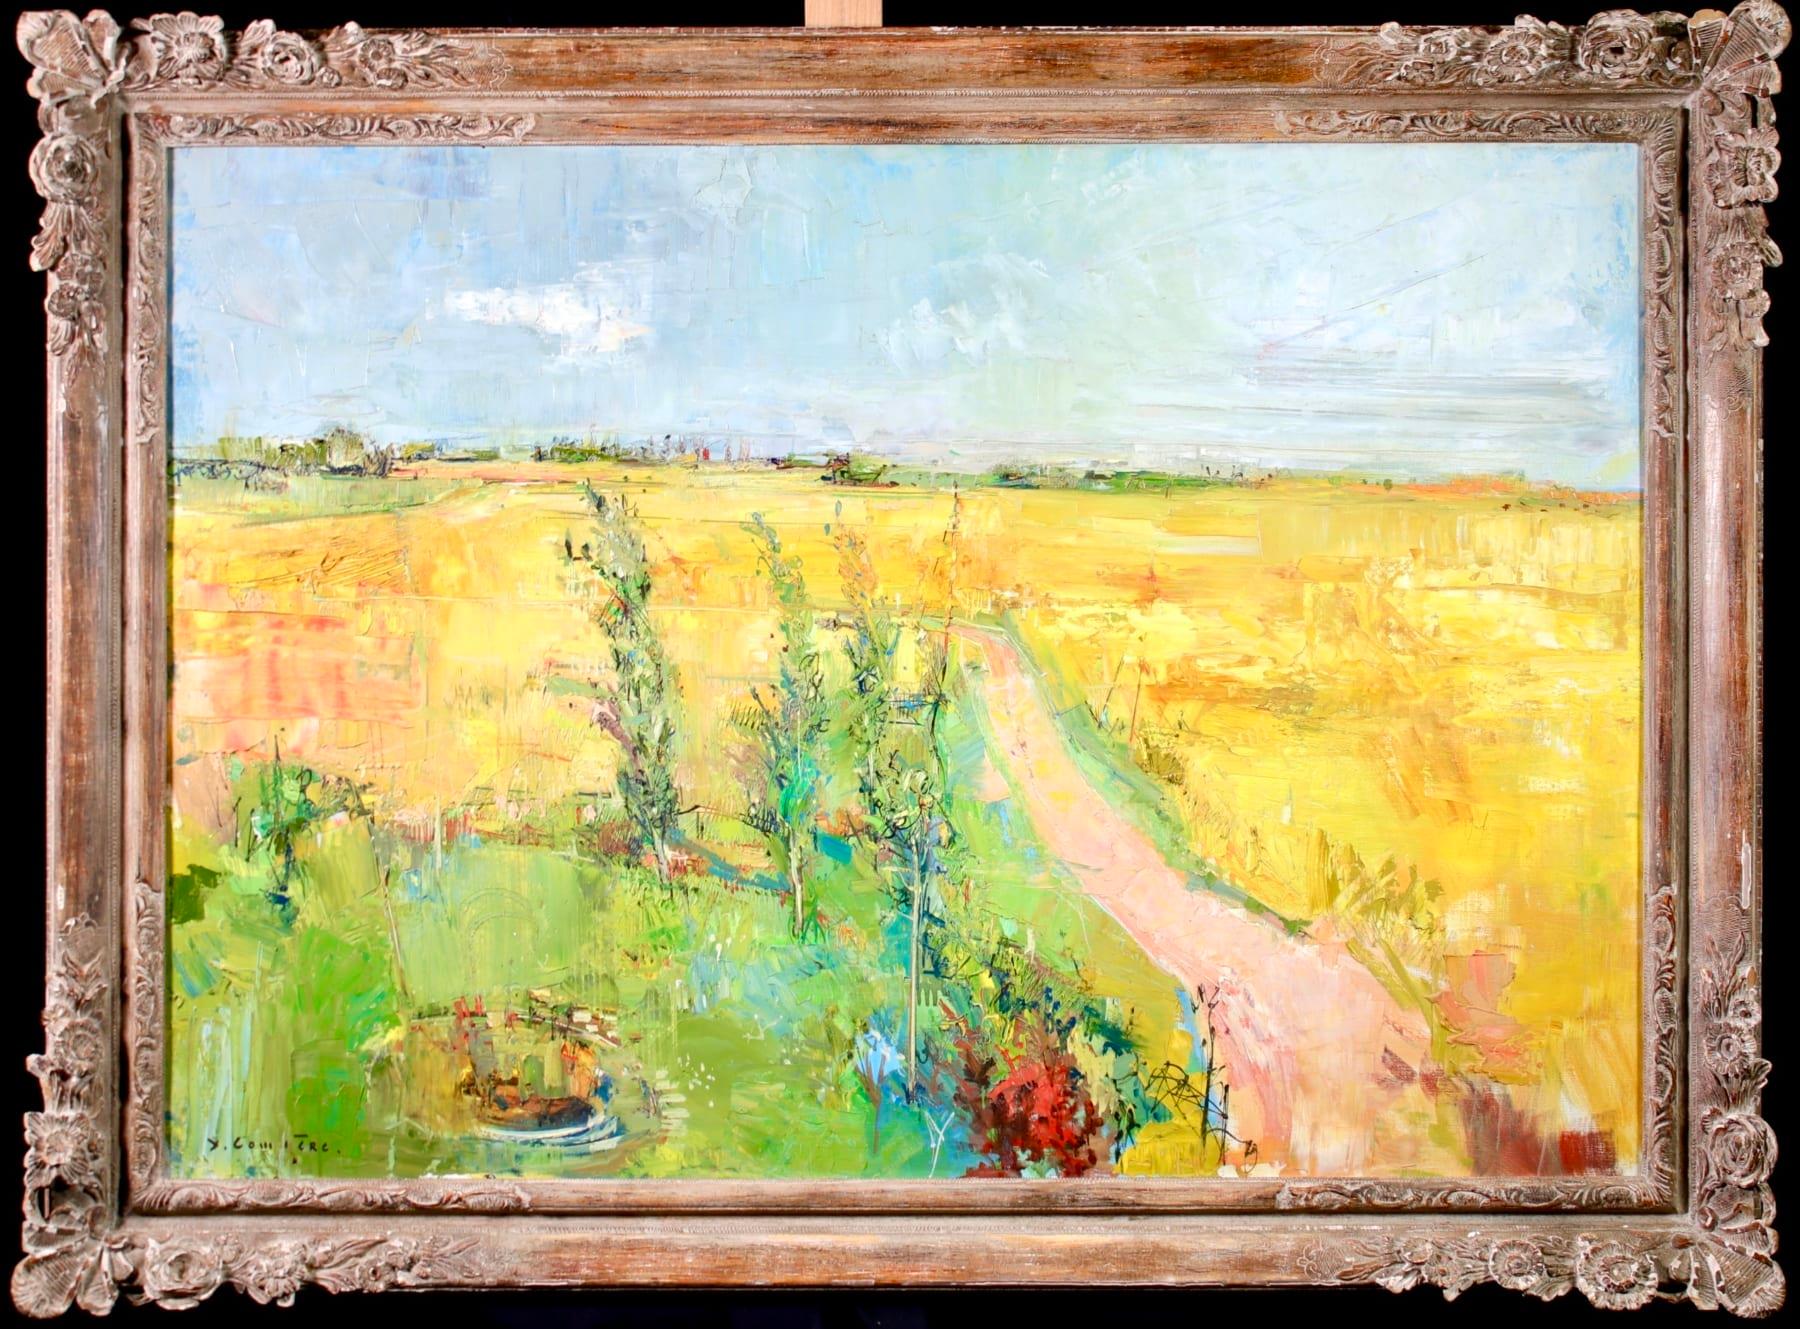 Jean Yves Commère Landscape Painting - Paysage - Post Impressionist Oil, Summer Landscape by Jean Yves Commere